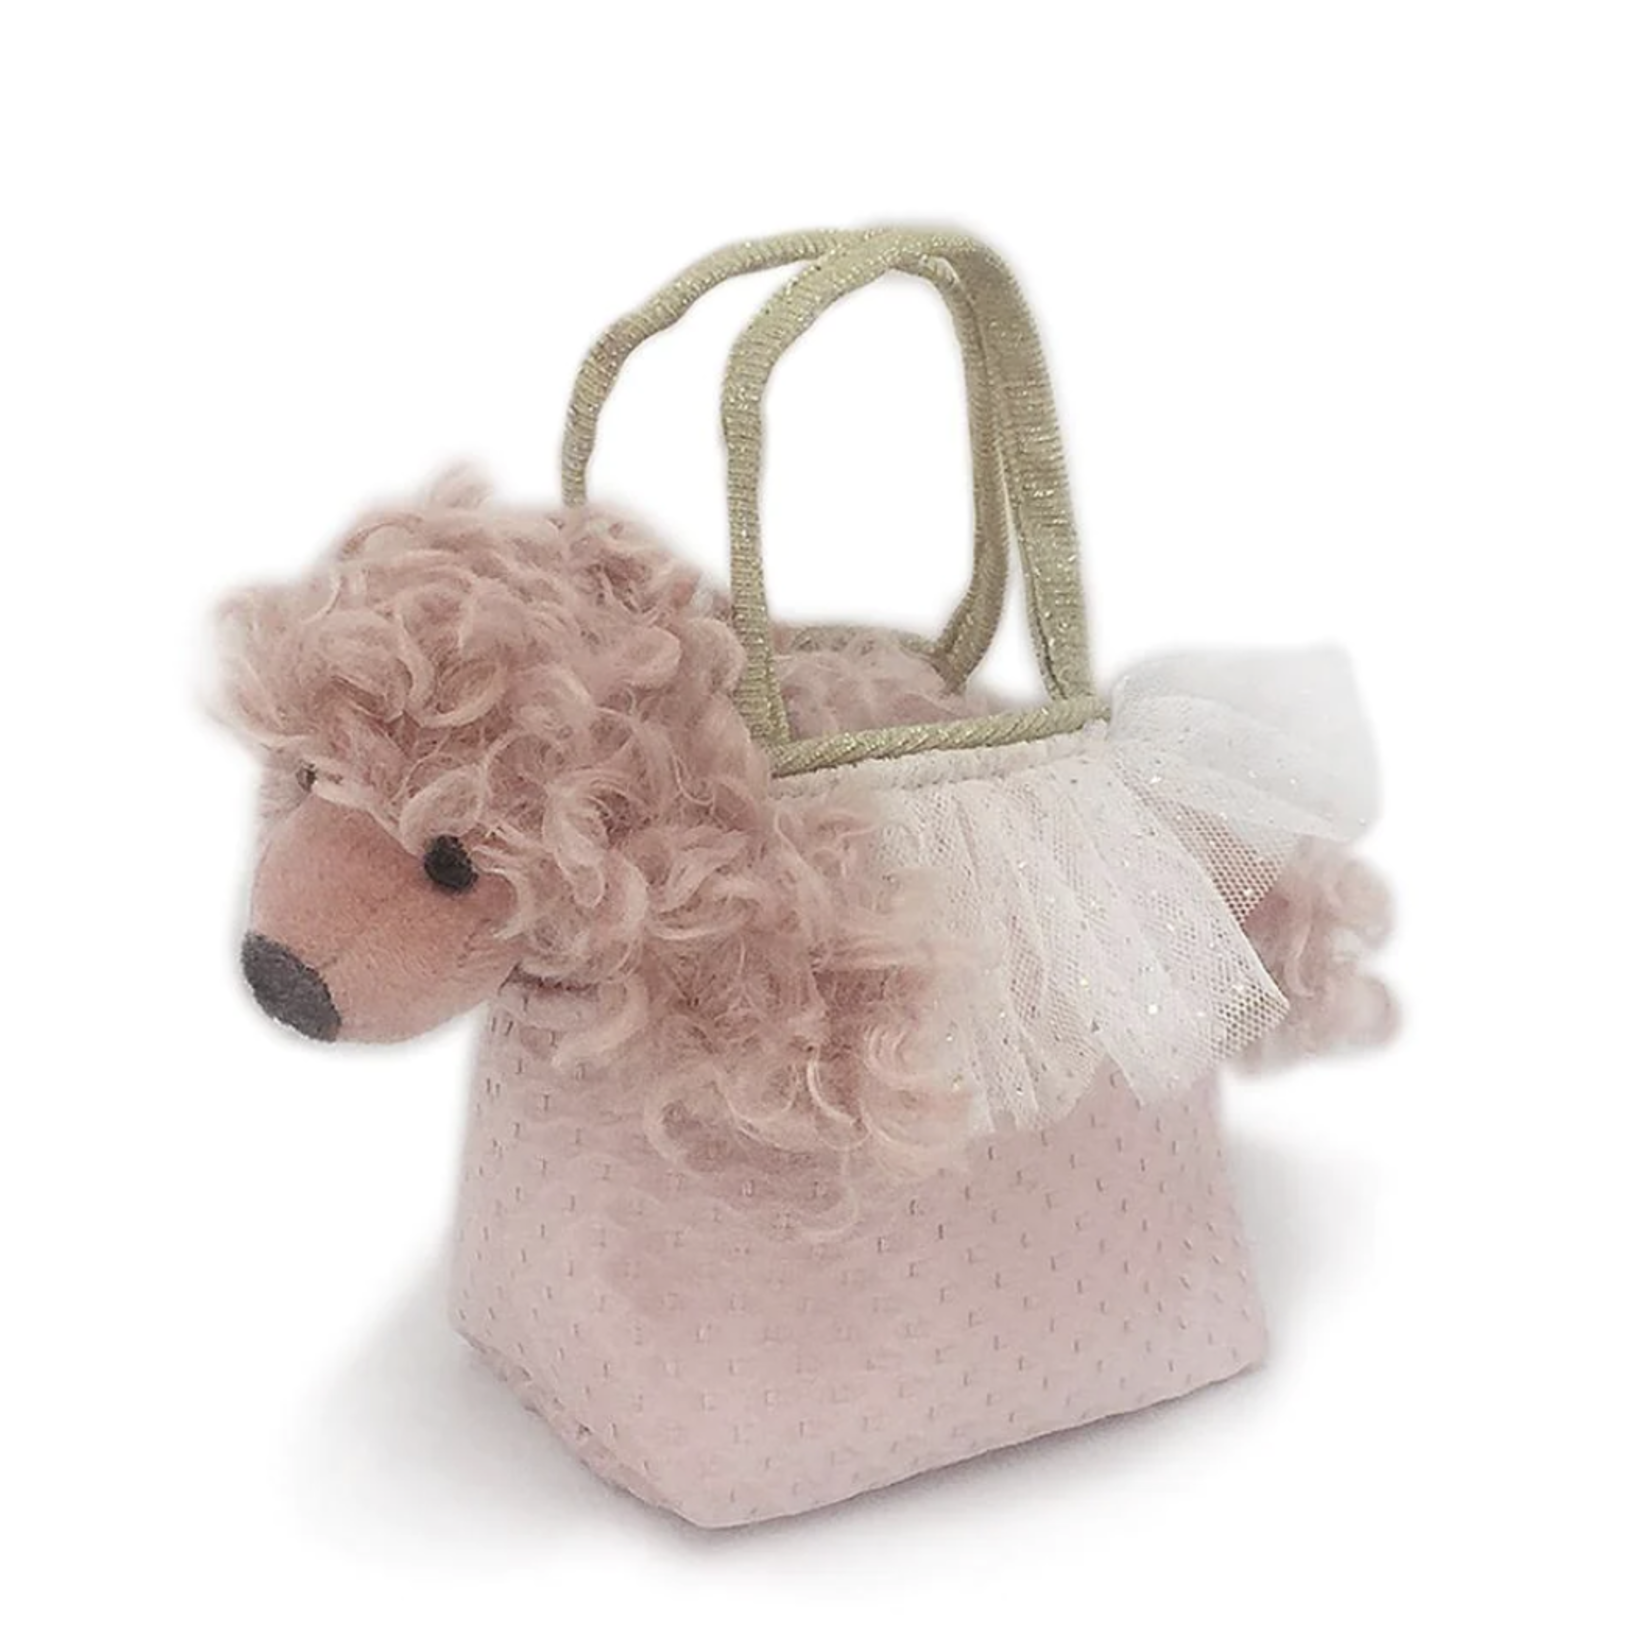 Mon Ami Pink Poodle in Purse